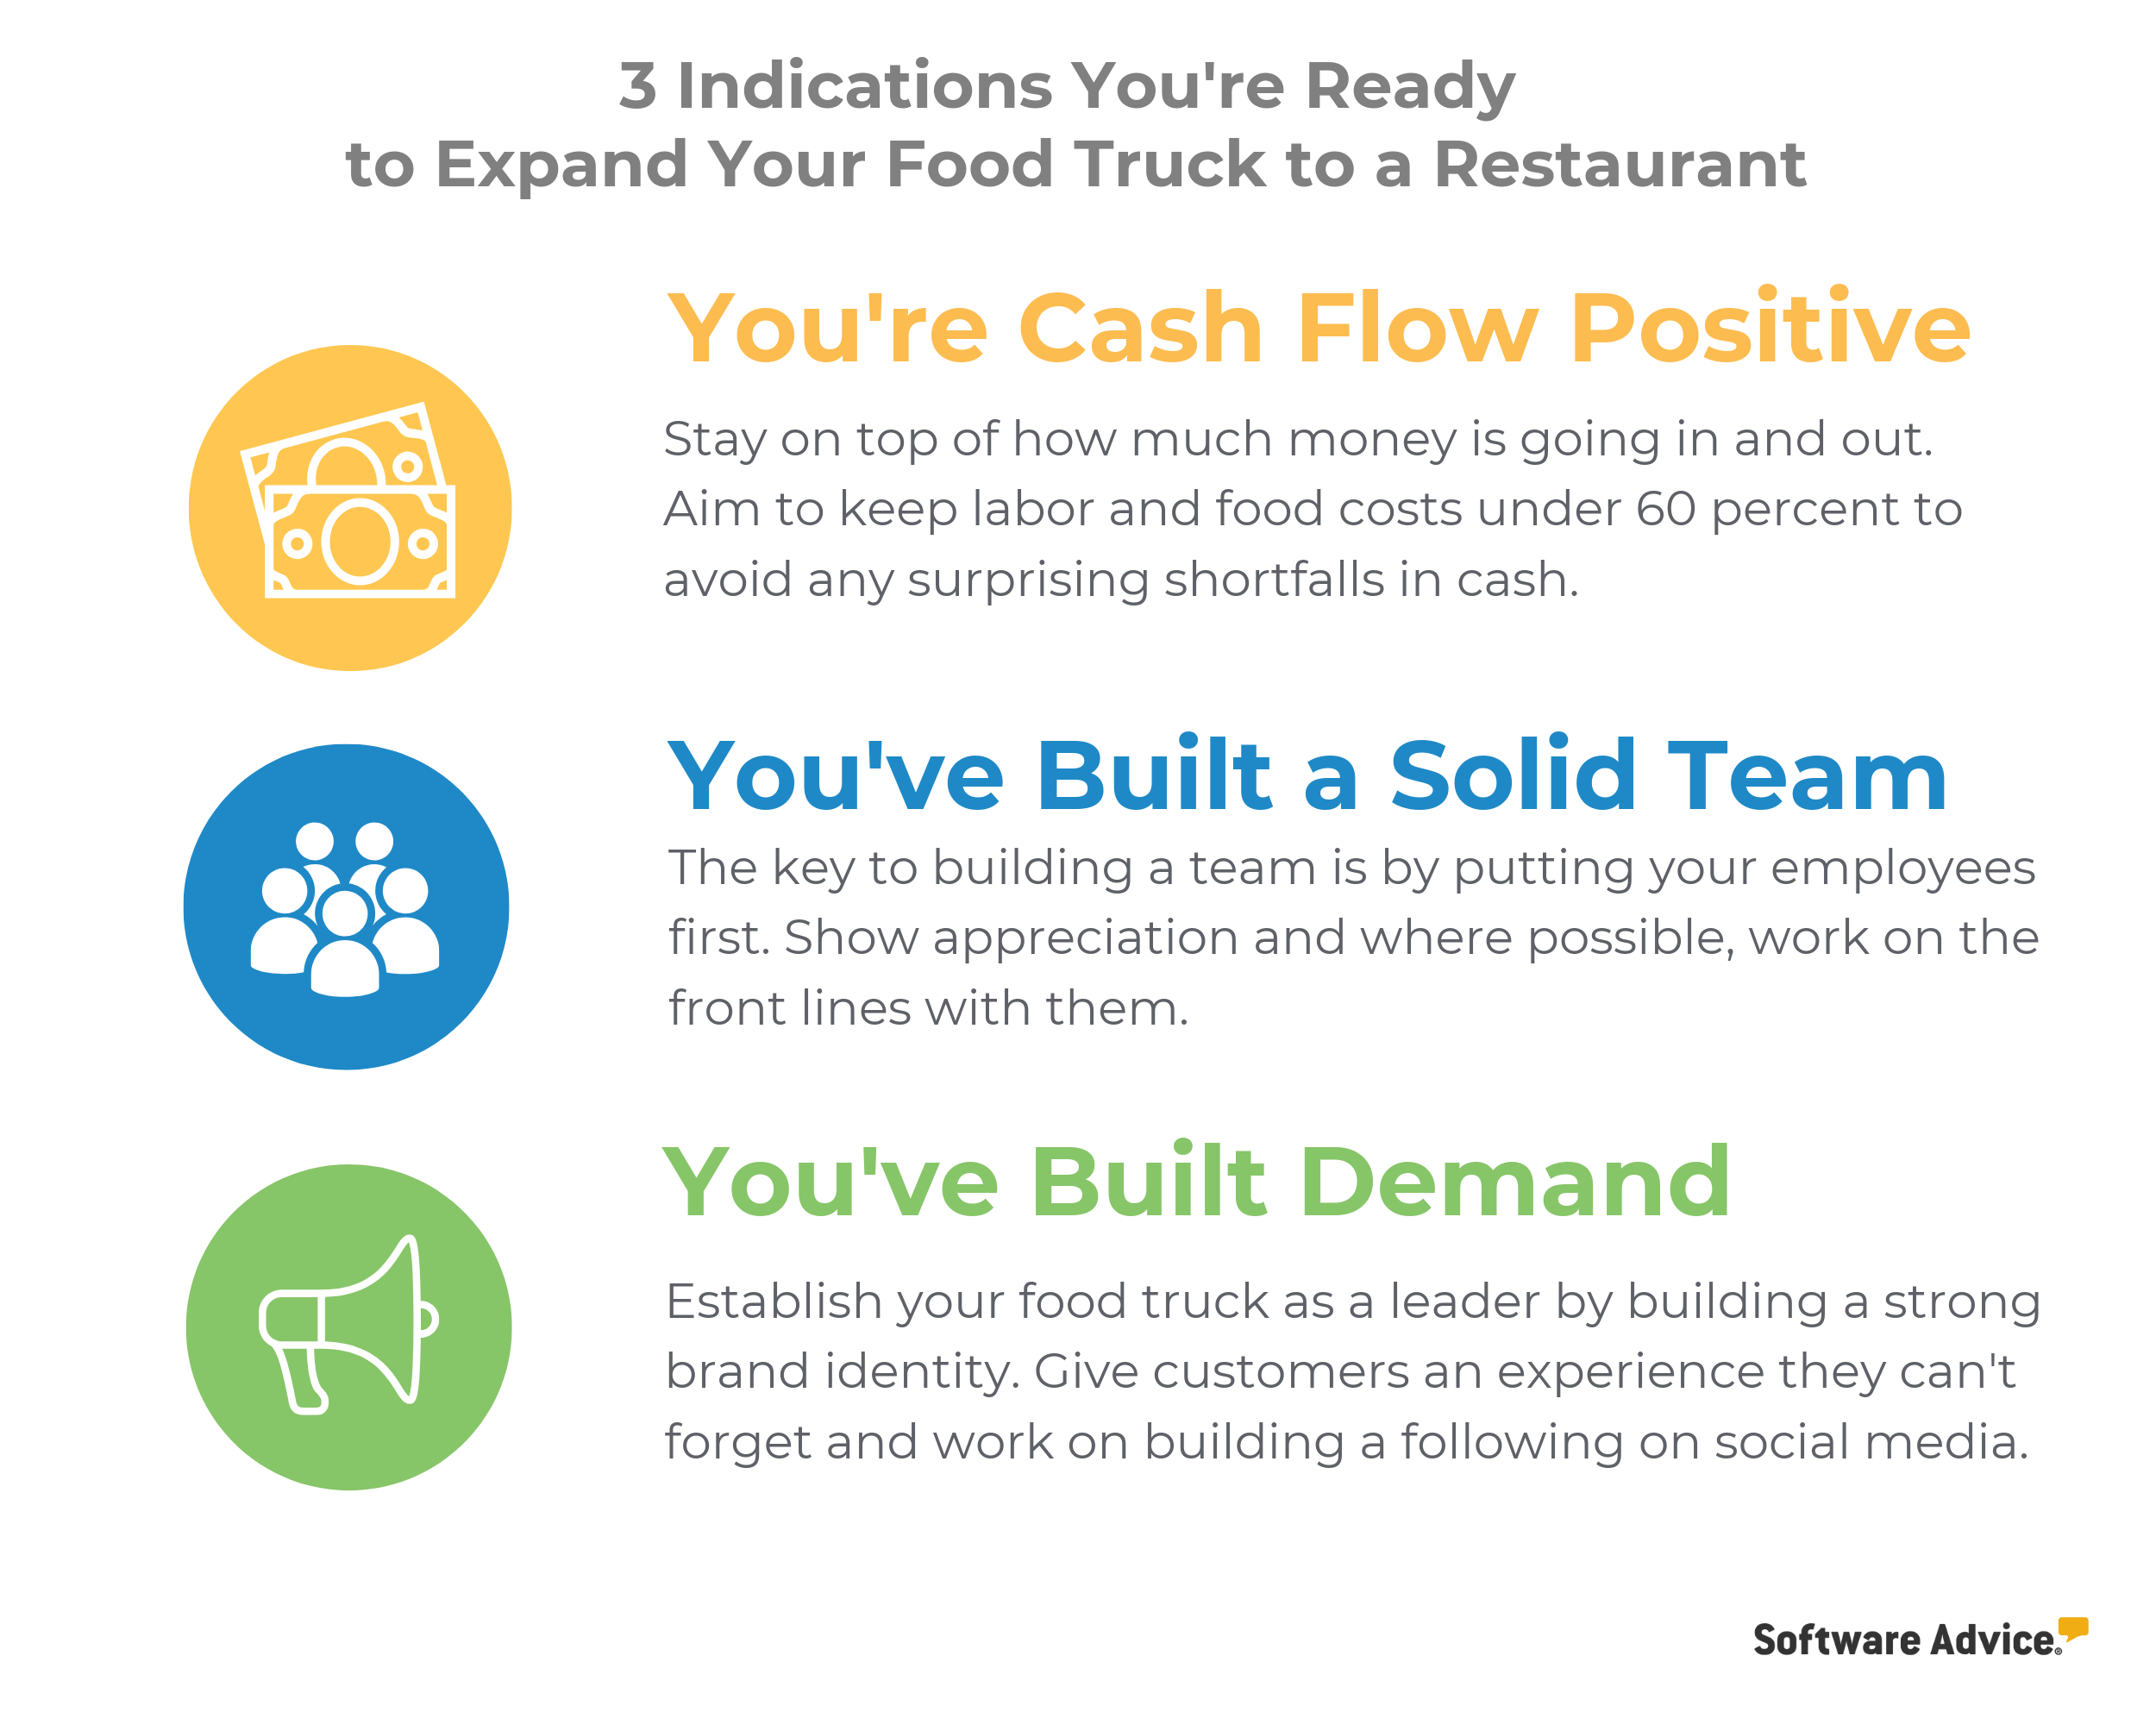 3-indications-you're-ready-to-expand-your-foodtruck-restaurant